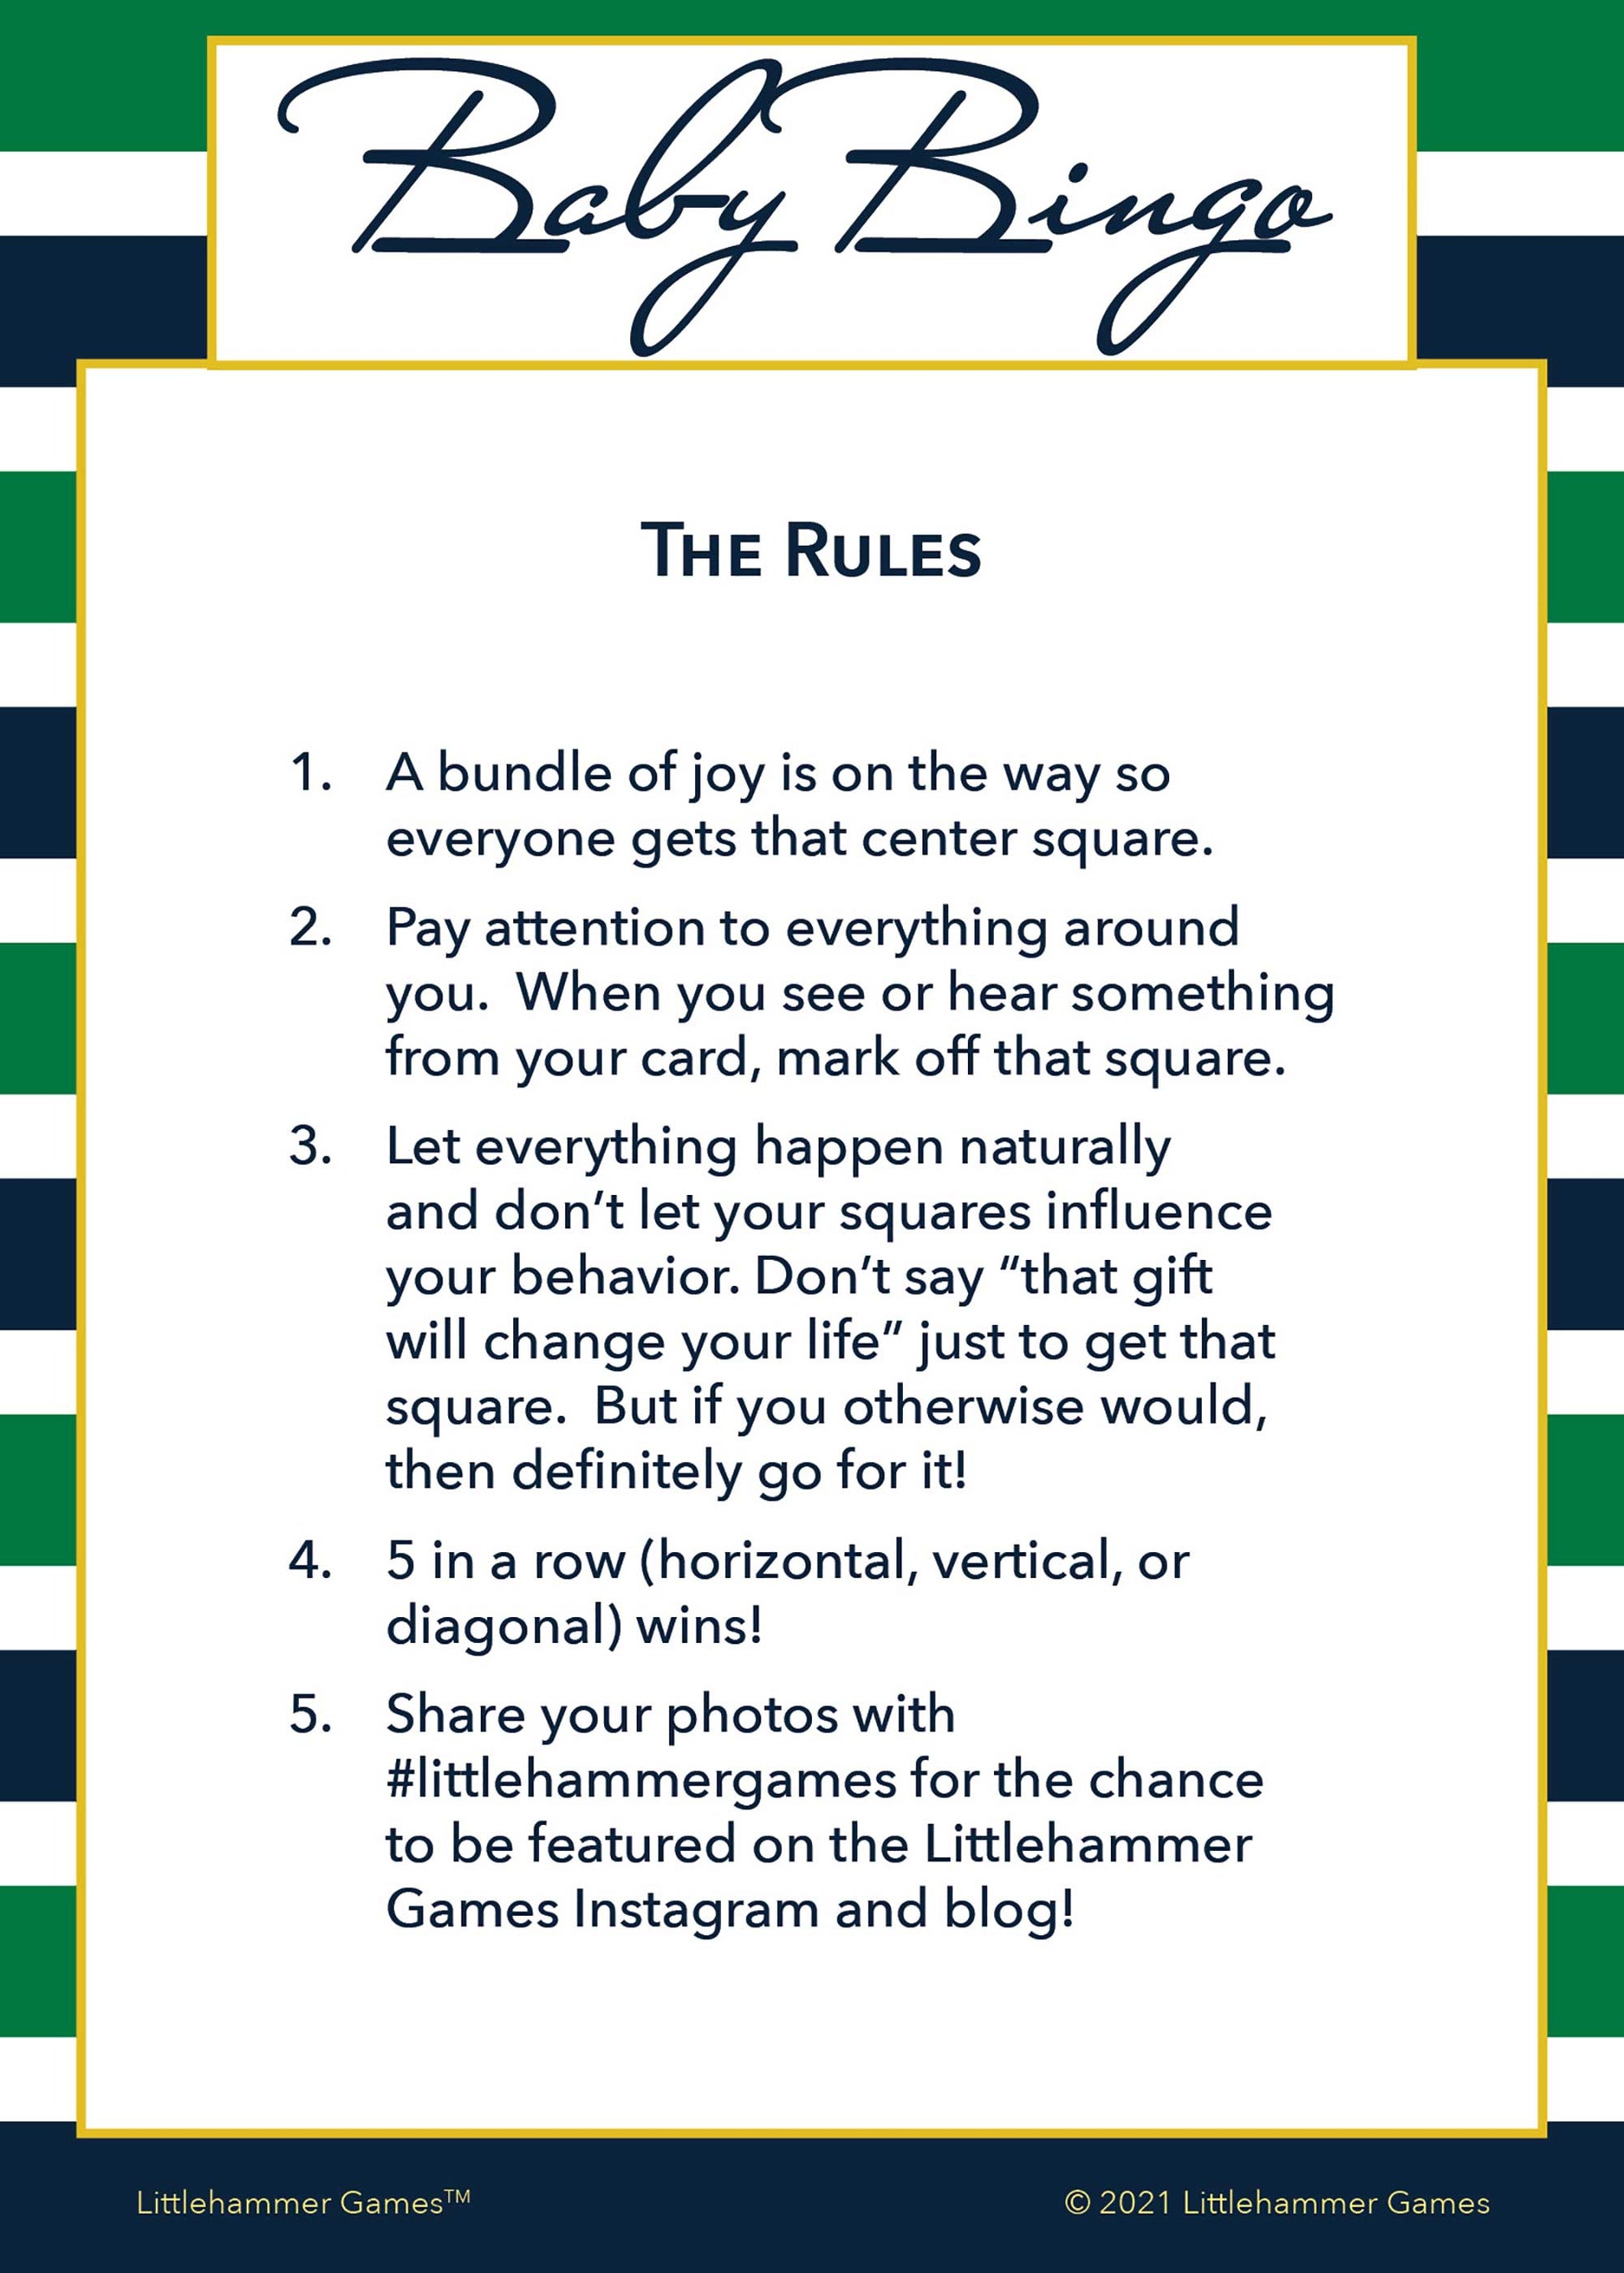 Baby Bingo rules card with a green and navy-striped background